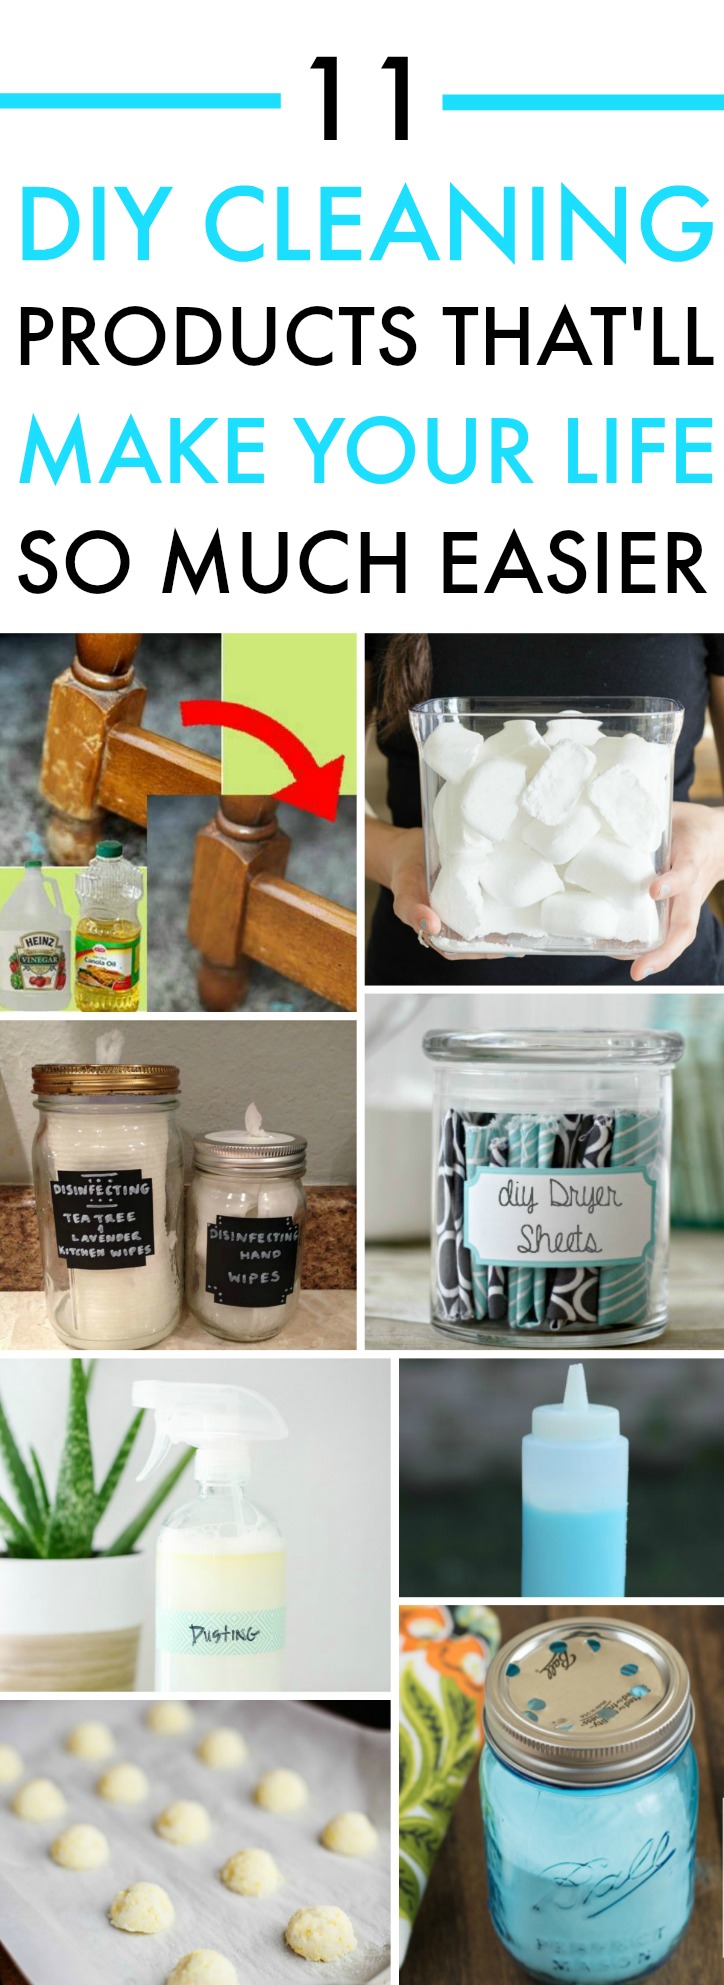 These DIY cleaning products recipes are simple to make and natural! From stain removers to carpet cleaners, these recipes have you covered. Use essential oils, vinegar, and baking soda to conquer your kitchen and more!